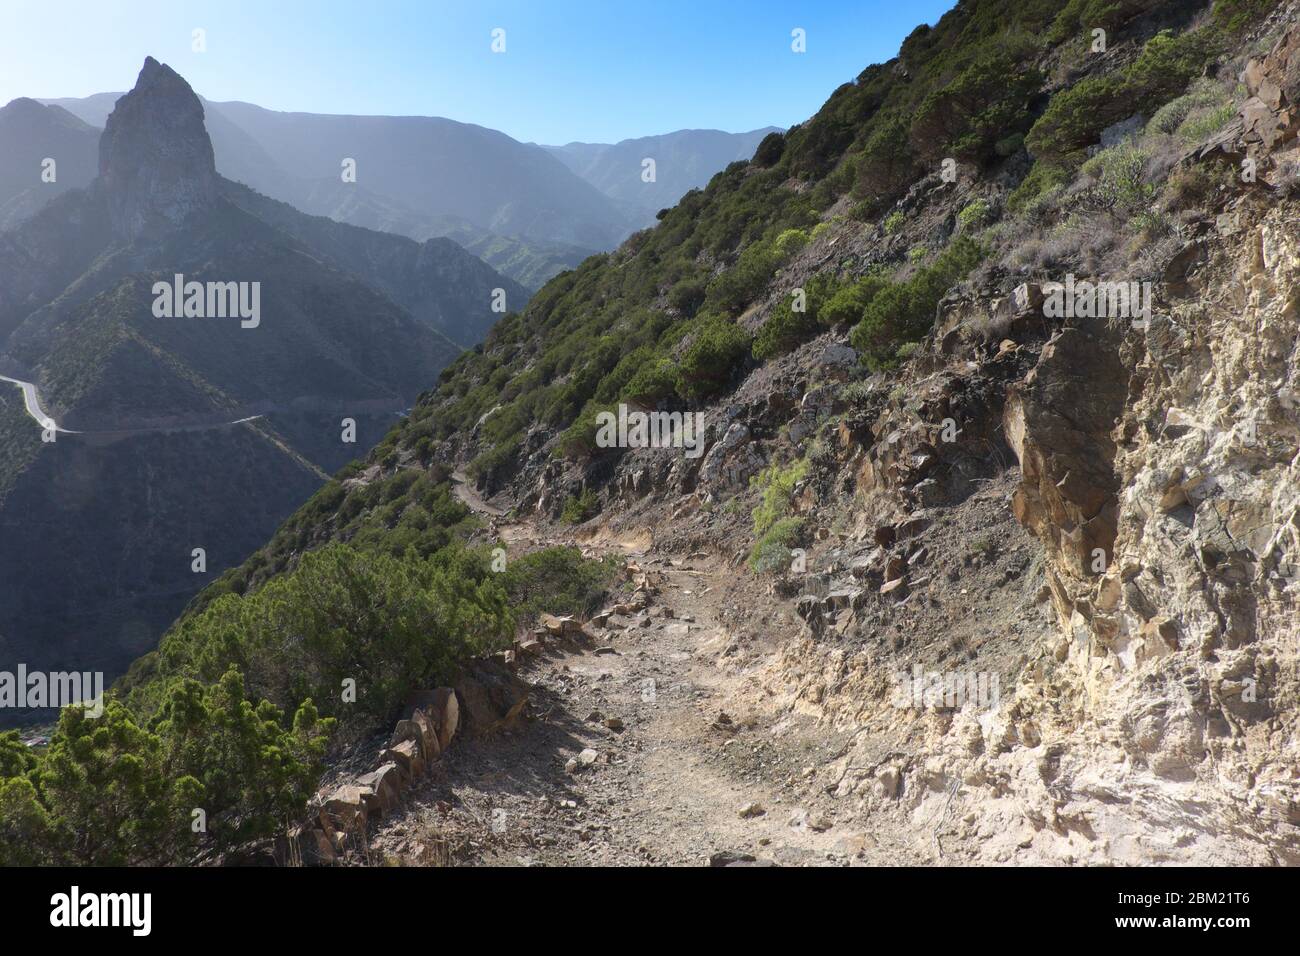 Roque El Cano and volcanic landscape seen from Vallehermoso path on La Gomera, one of the smaller Canary Islands Stock Photo